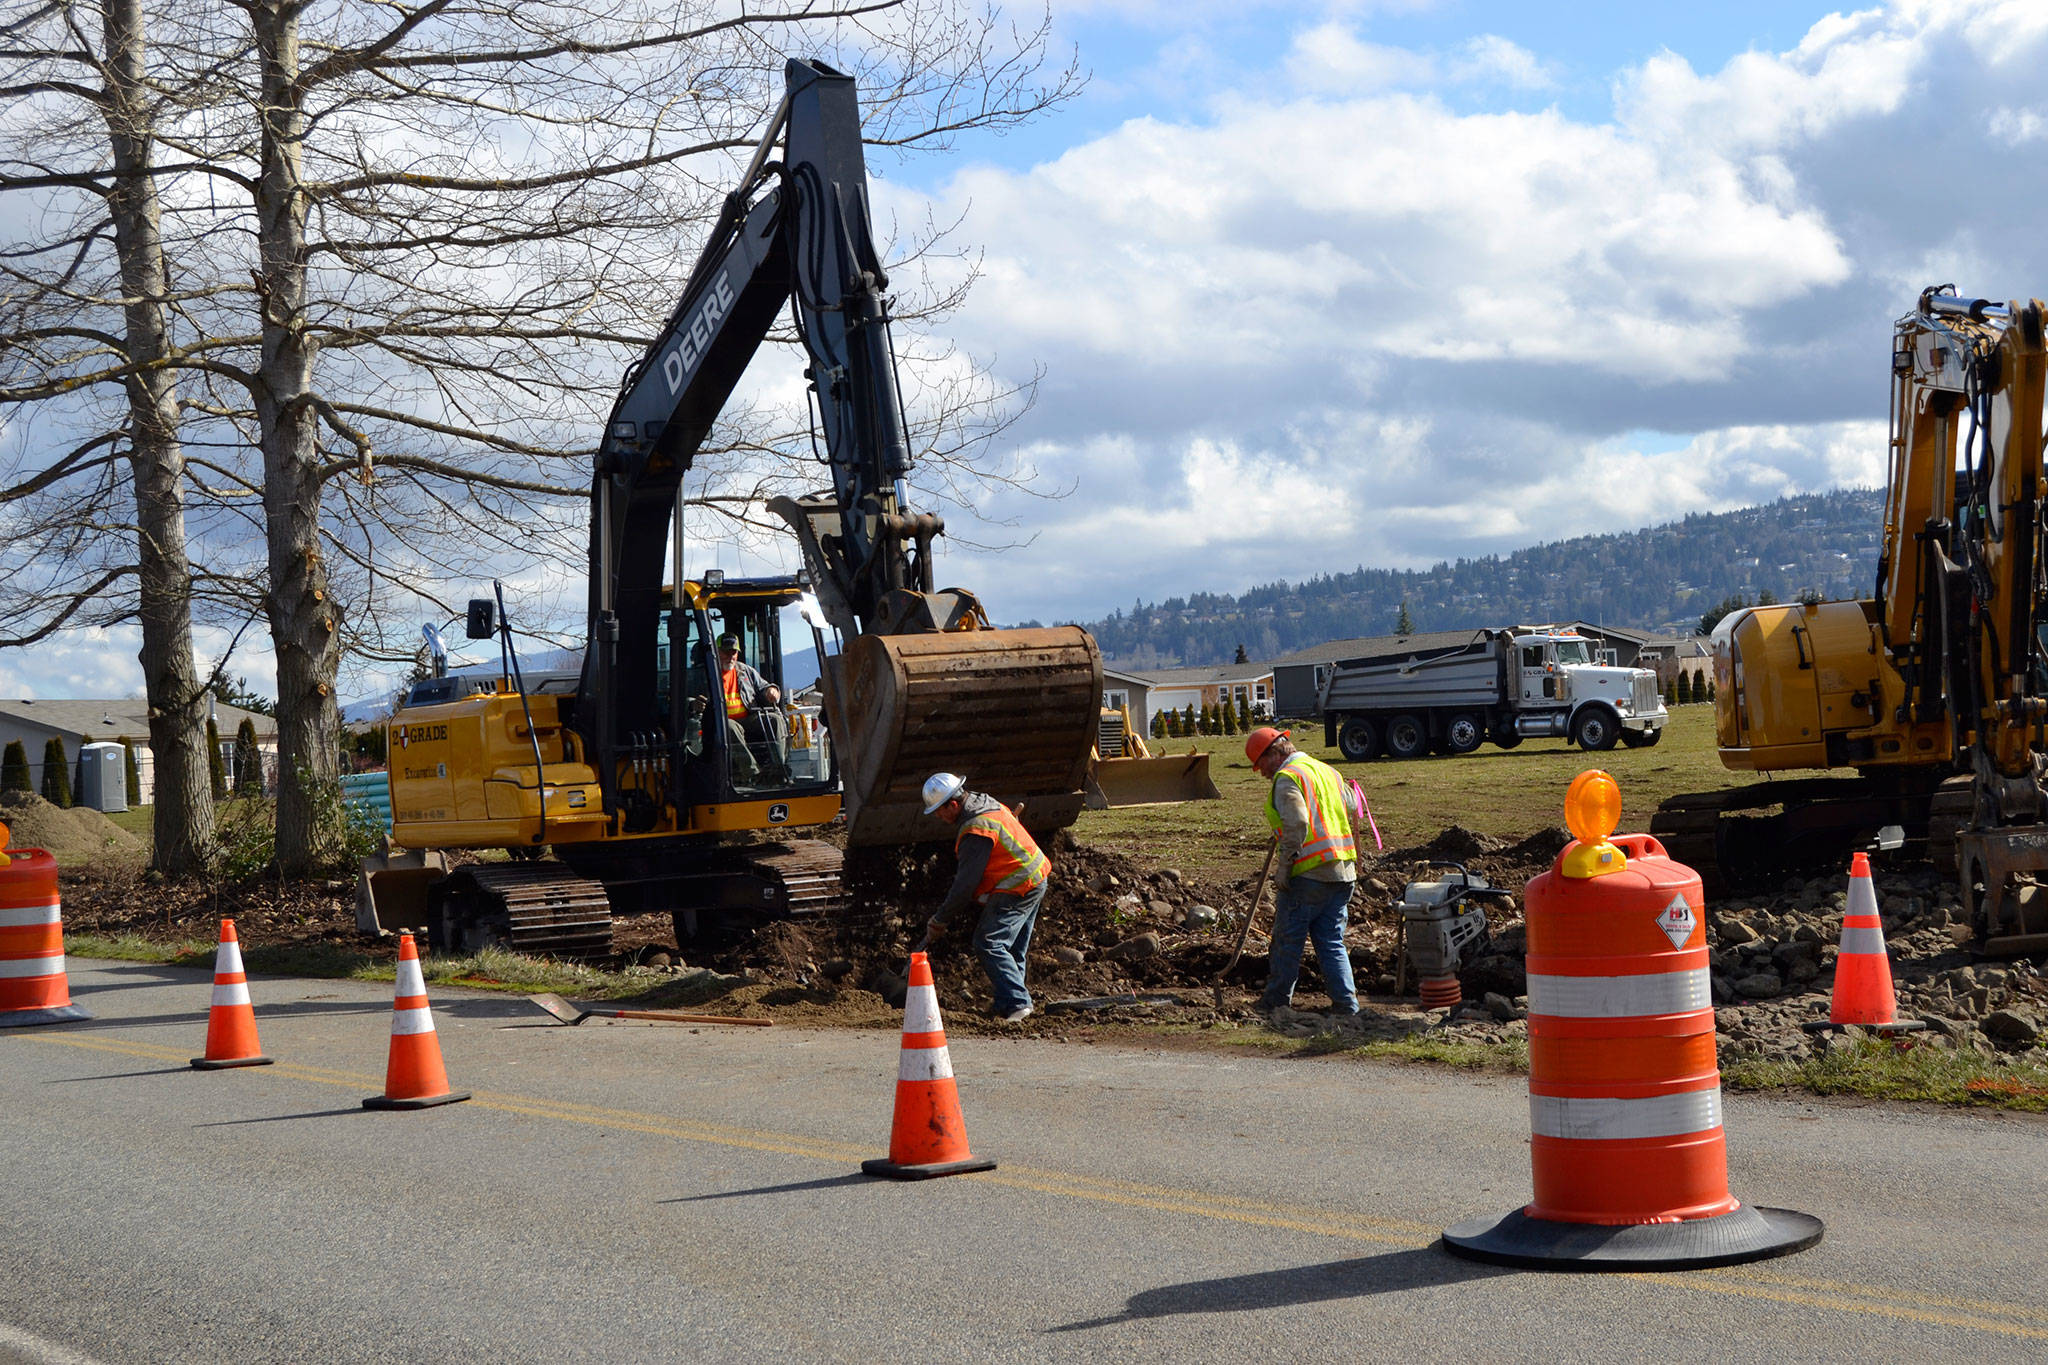 Through April 4, utility crews continue to work on weekdays installing sewer and water pipelines along Hendrickson Road for 57 news homes set to go in under the name Cameron Village. The project features three phases and connects West Hendrickson Road to West Fir Street in Phase 2. Sequim Gazette photo by Matthew Nash